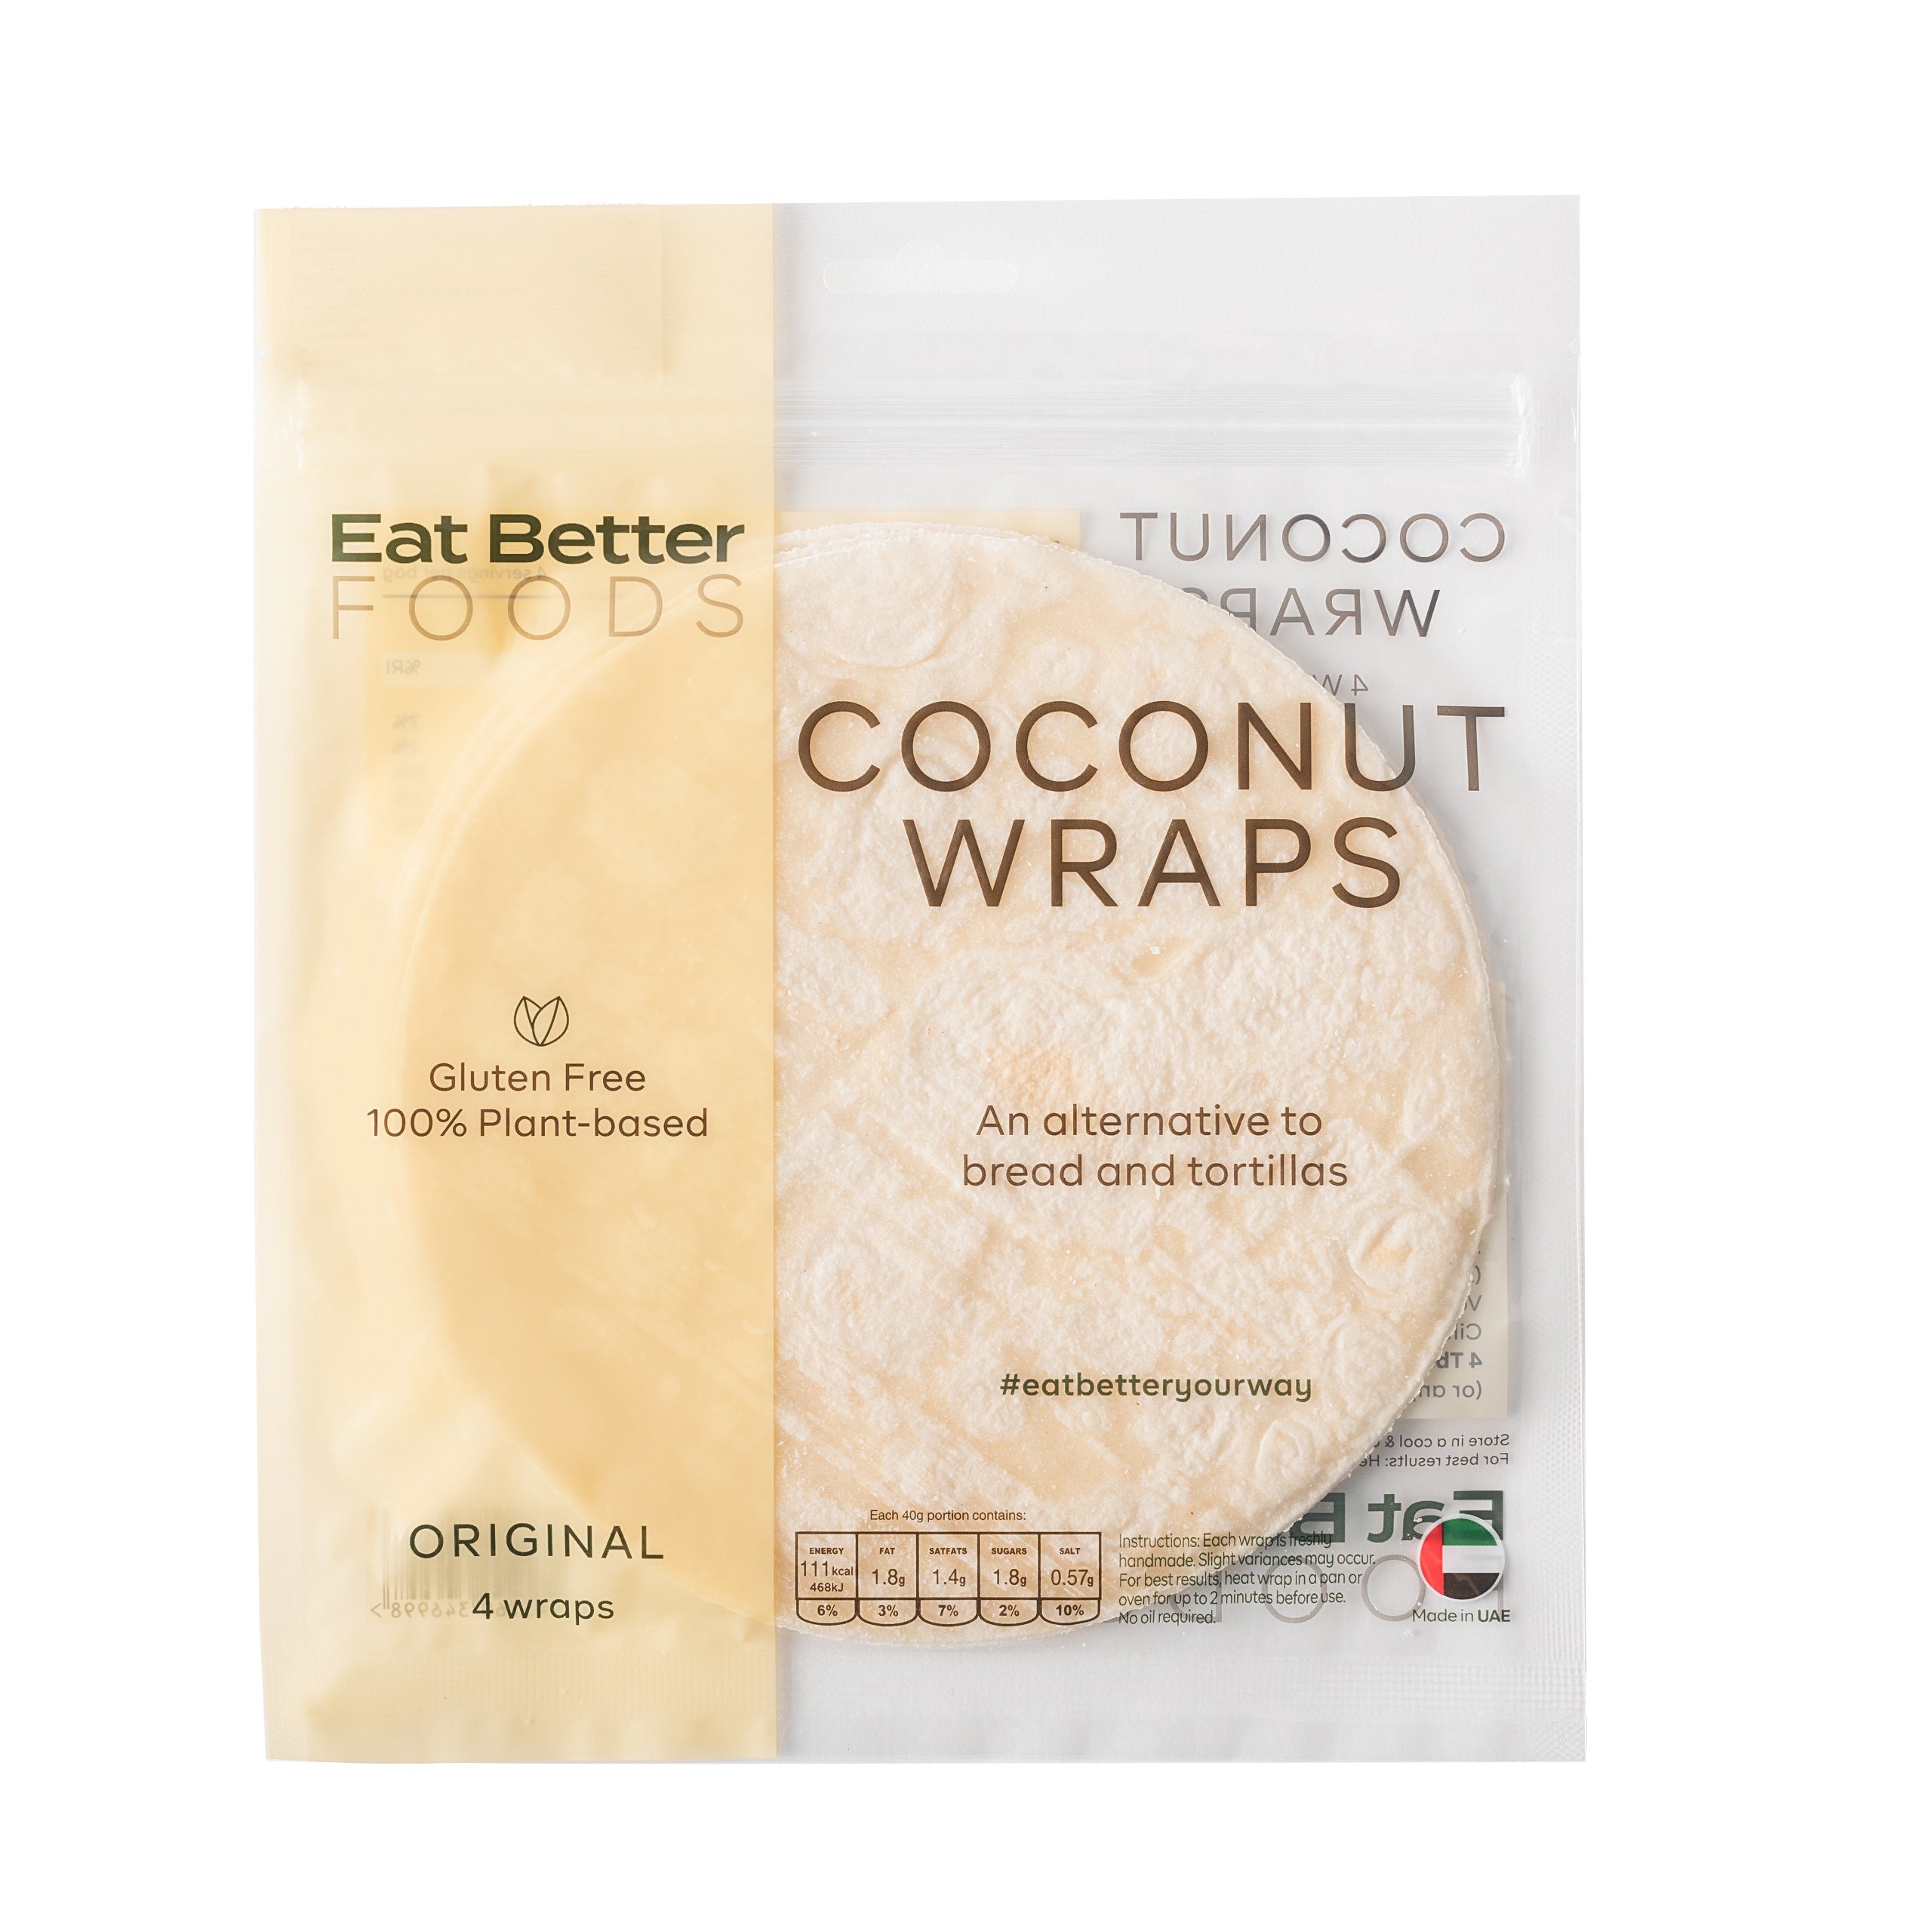 EAT BETTER FOODS Coconut Wraps, Pack of 4